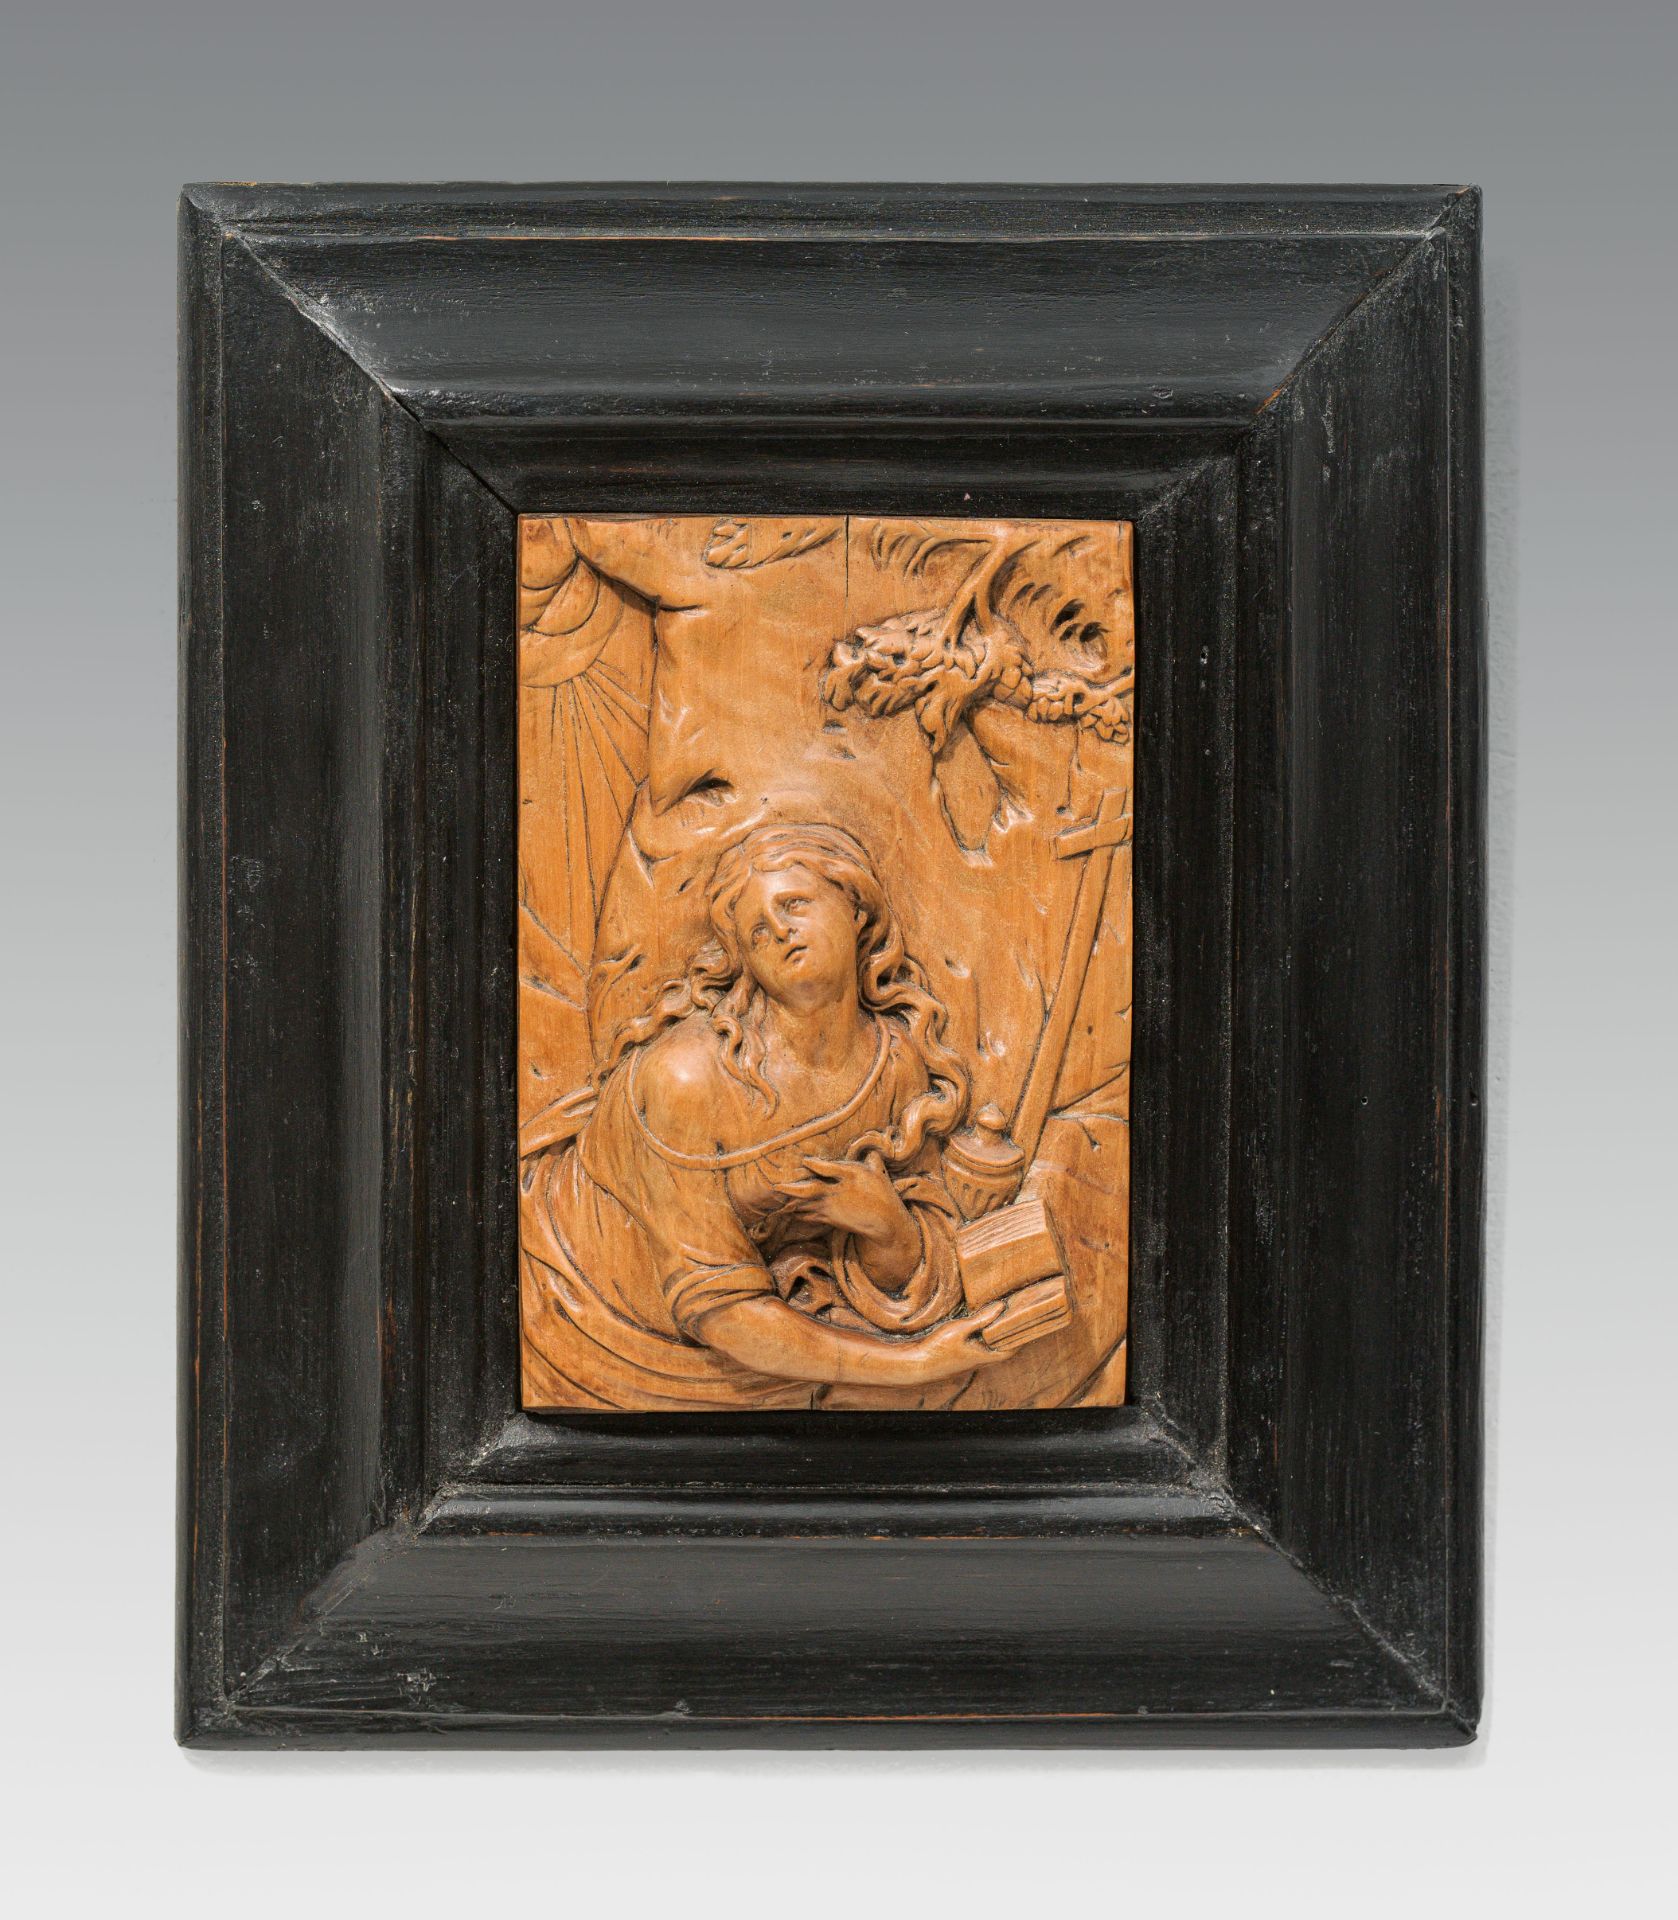 Follower of Christoph Daniel Schenk : Wooden relief with Mary Magdalene as a penitent